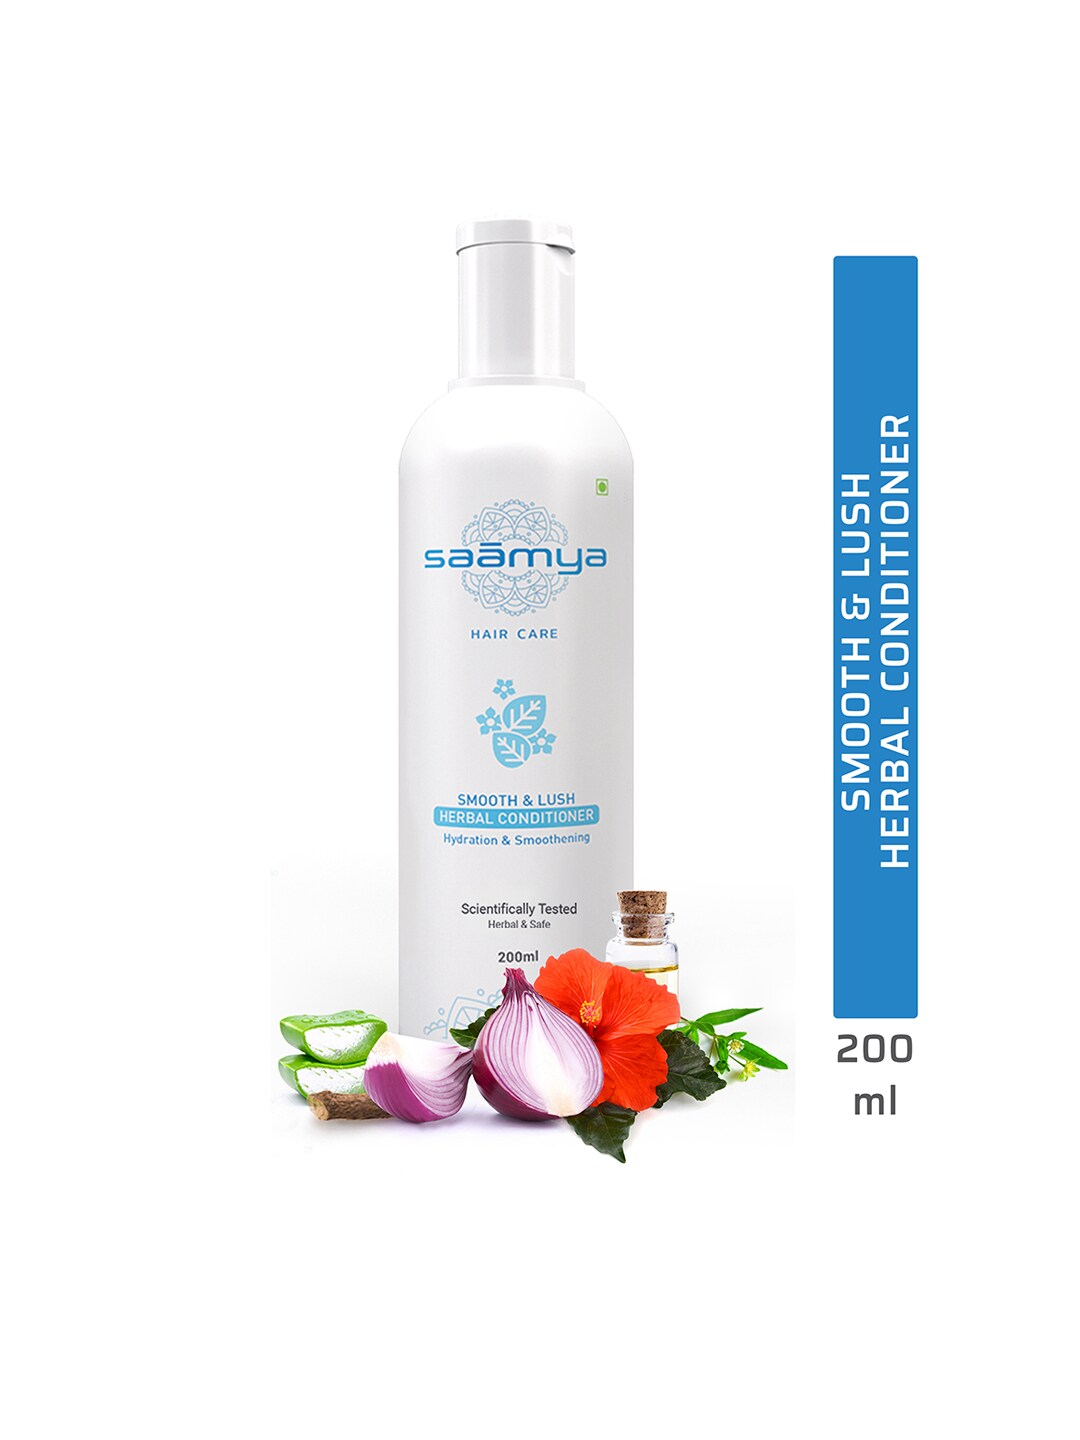 Saamya Smooth & Lush Herbal Conditioner 200 ml Price in India